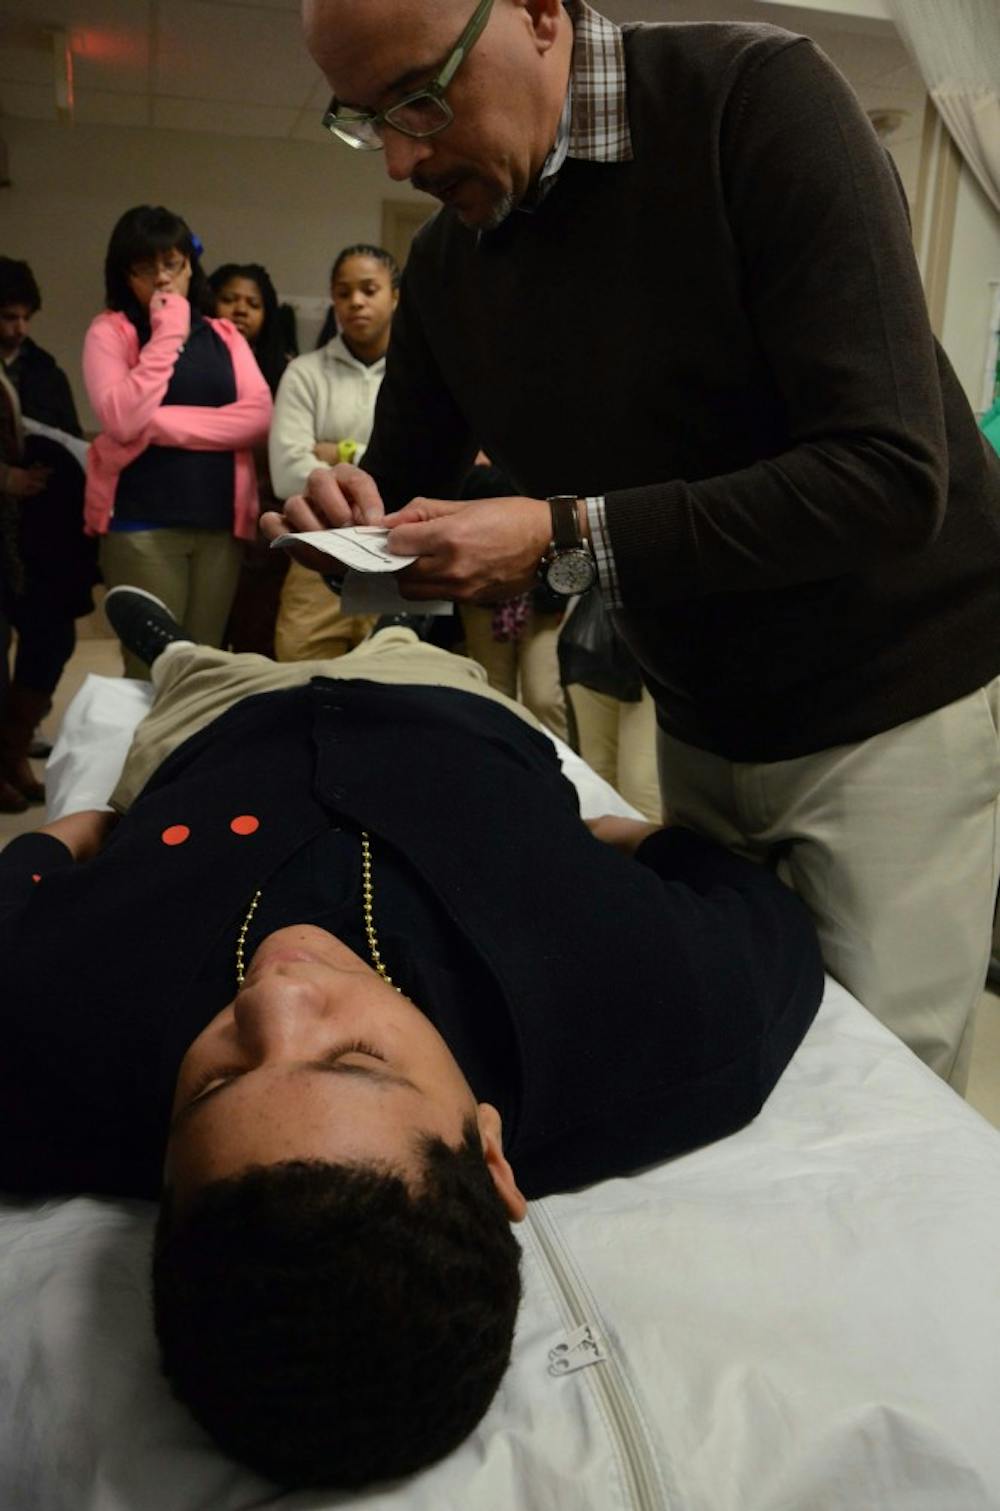 Cradle to Grave is a simulation program hosted by the Temple University Hospital and run by two Penn grads. The program is aimed towards at-risk youth in Philly and they run through a scenario of a teenager's death. 